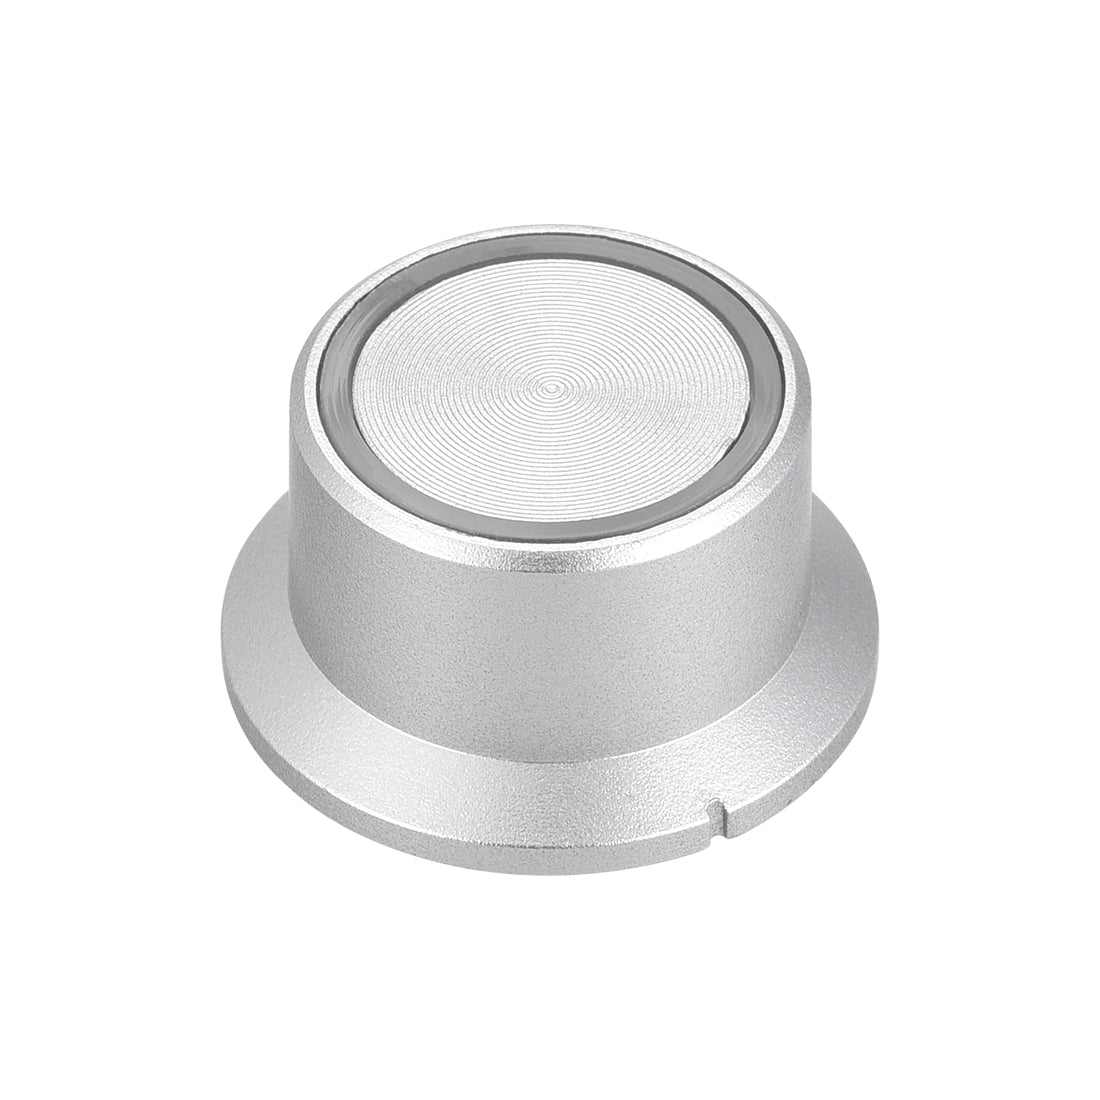 Uxcell Uxcell 6mm Potentiometer Control Knobs For Electric Guitar Acrylic Volume Tone Knobs Grey